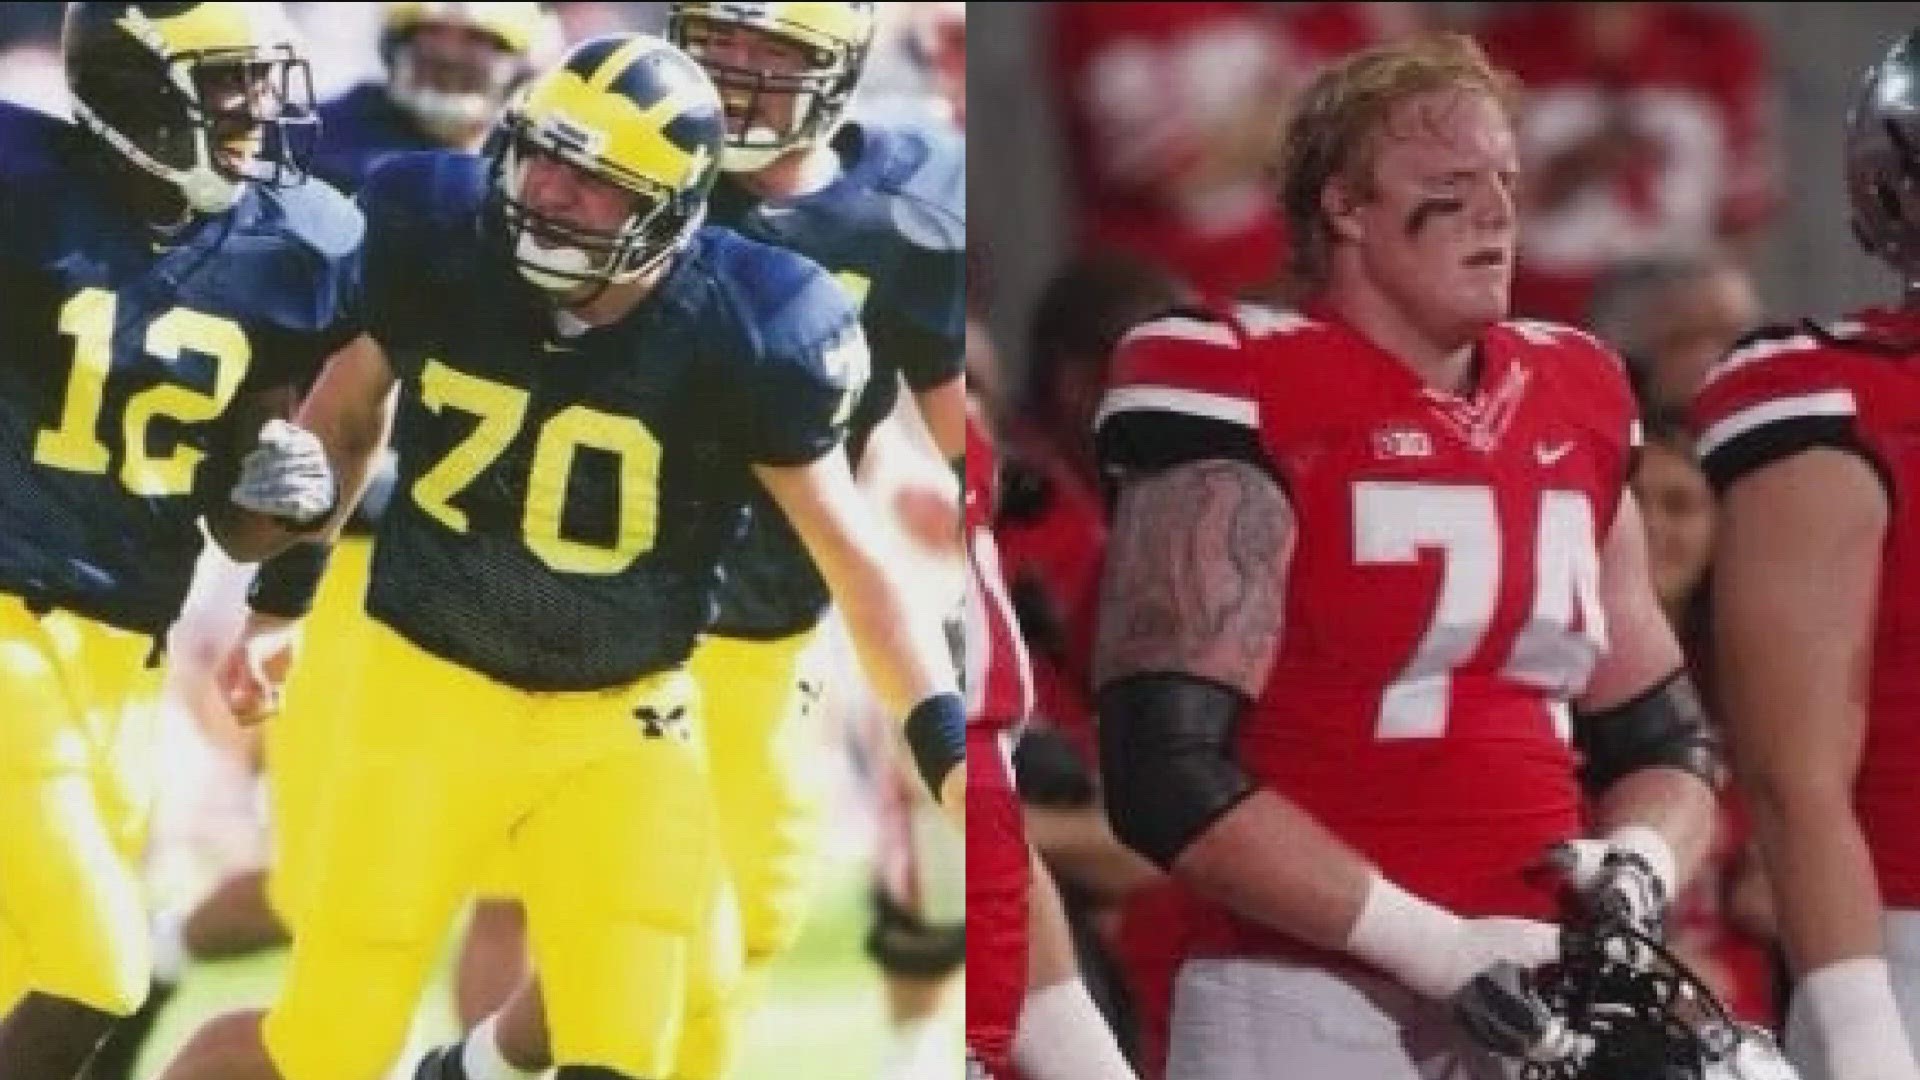 Two St. John's alumni talk about playing for Ohio State and Michigan.